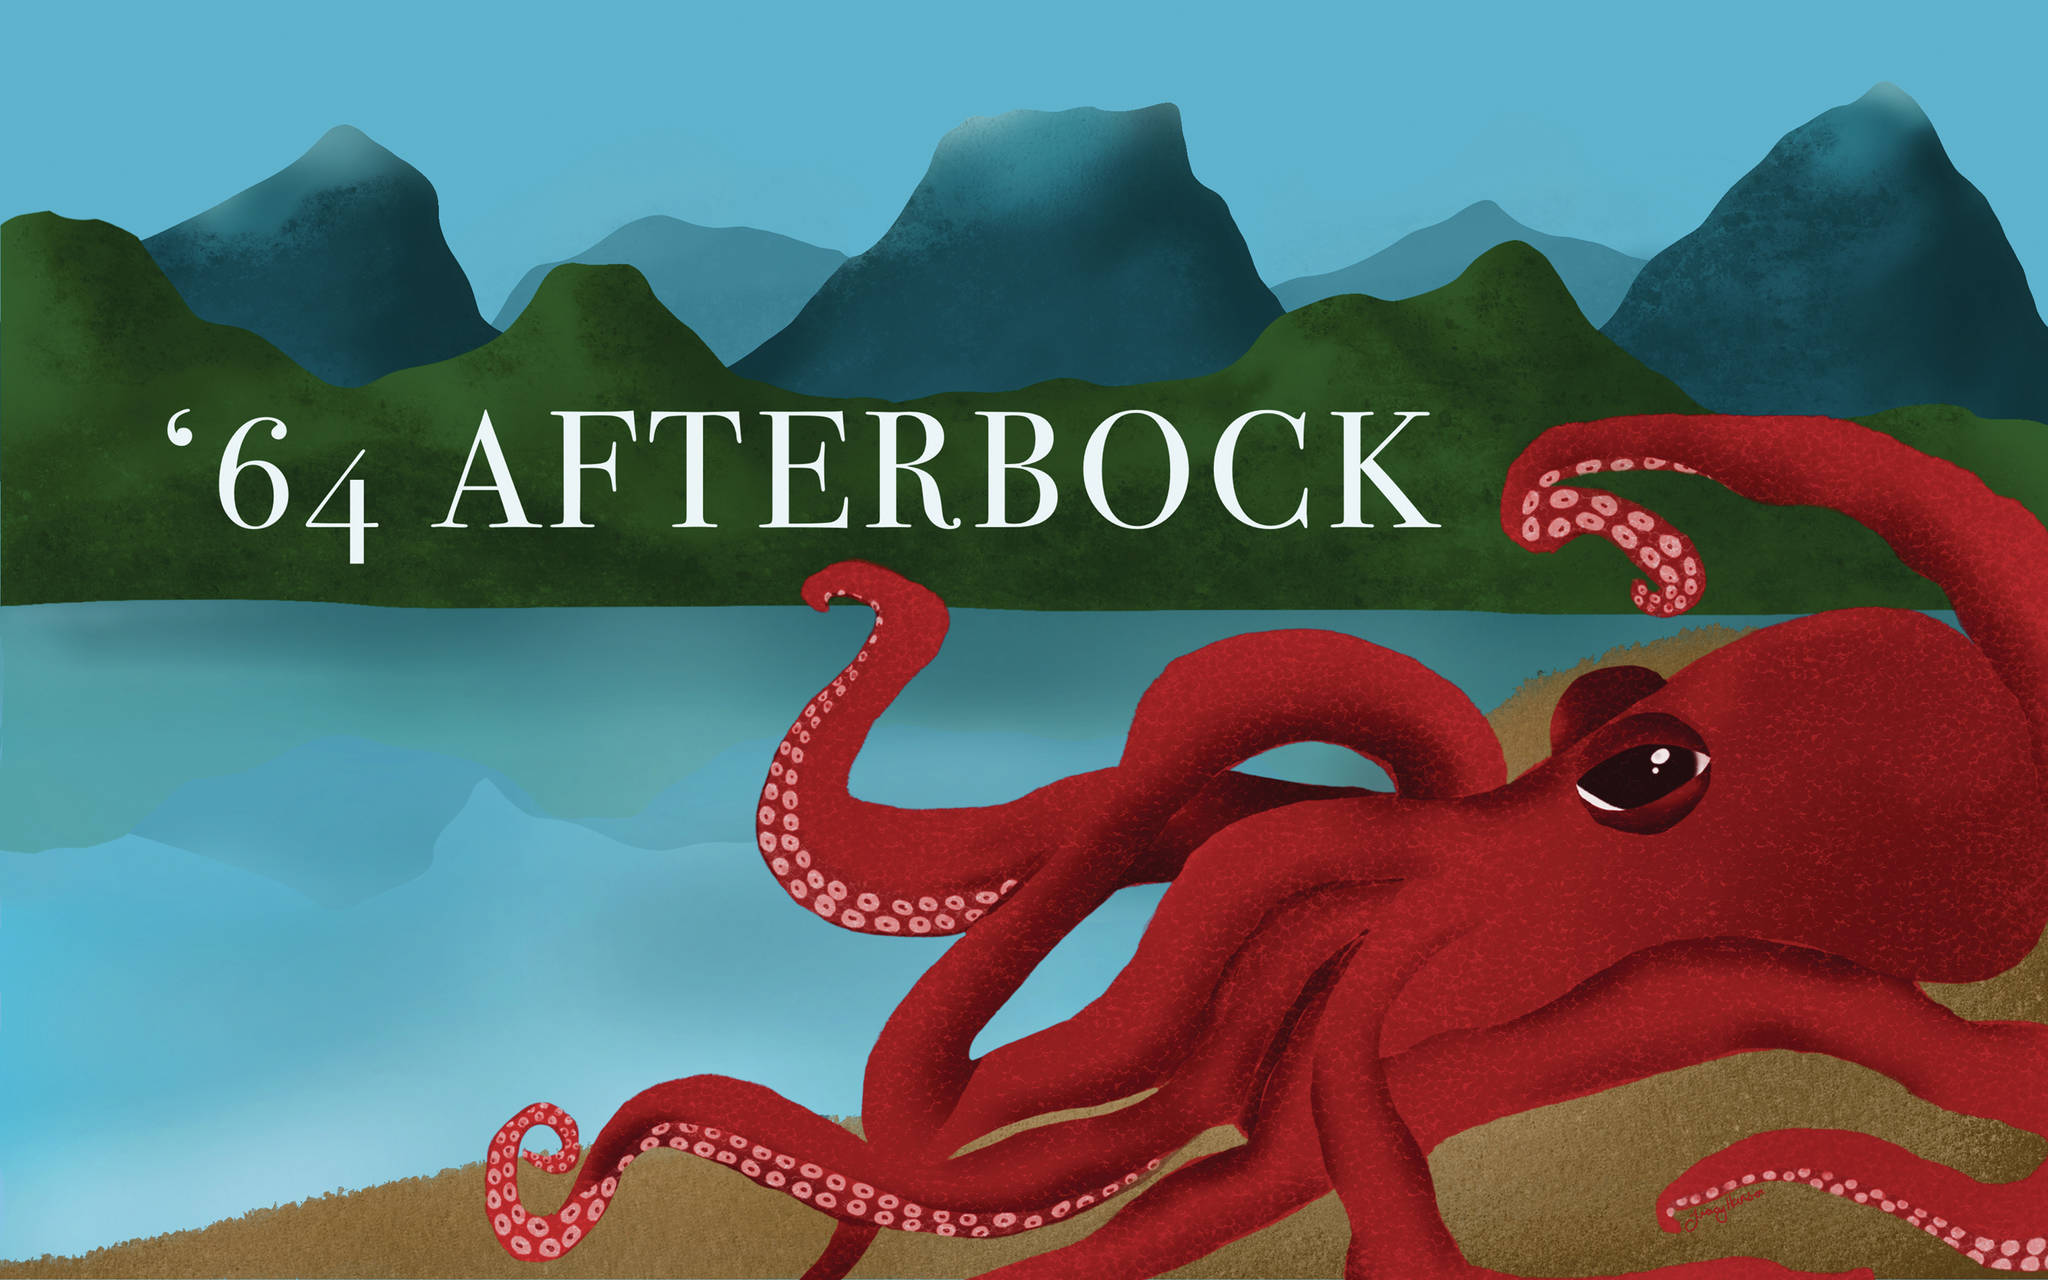 Tracey Hansen’s design for Grace Ridge Brewery’s ‘64 Afterbock beer label contest to commemorate the 20th anniversary of the Kachemak Bay National Estuarine Research Reserve (KBNERR). The designs go on exhibit and the winning label will be revealed Friday, Feb. 5, 2021, at the brewery in Homer, Alaska. (Photo courtesy of Grace Ridge Brewery)